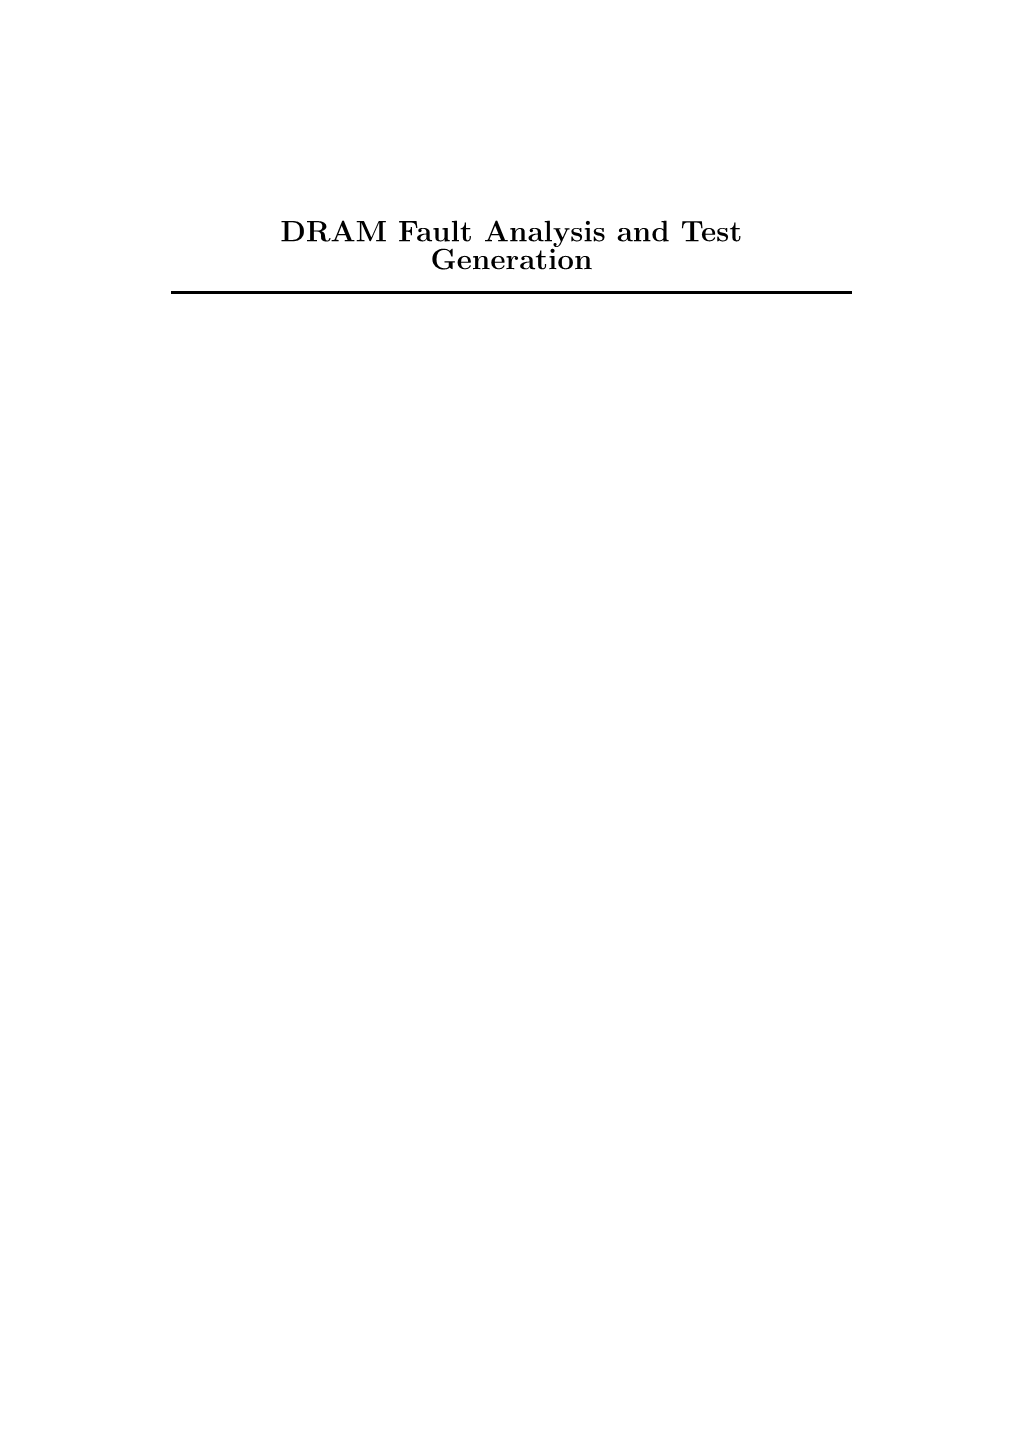 DRAM Fault Analysis and Test Generation